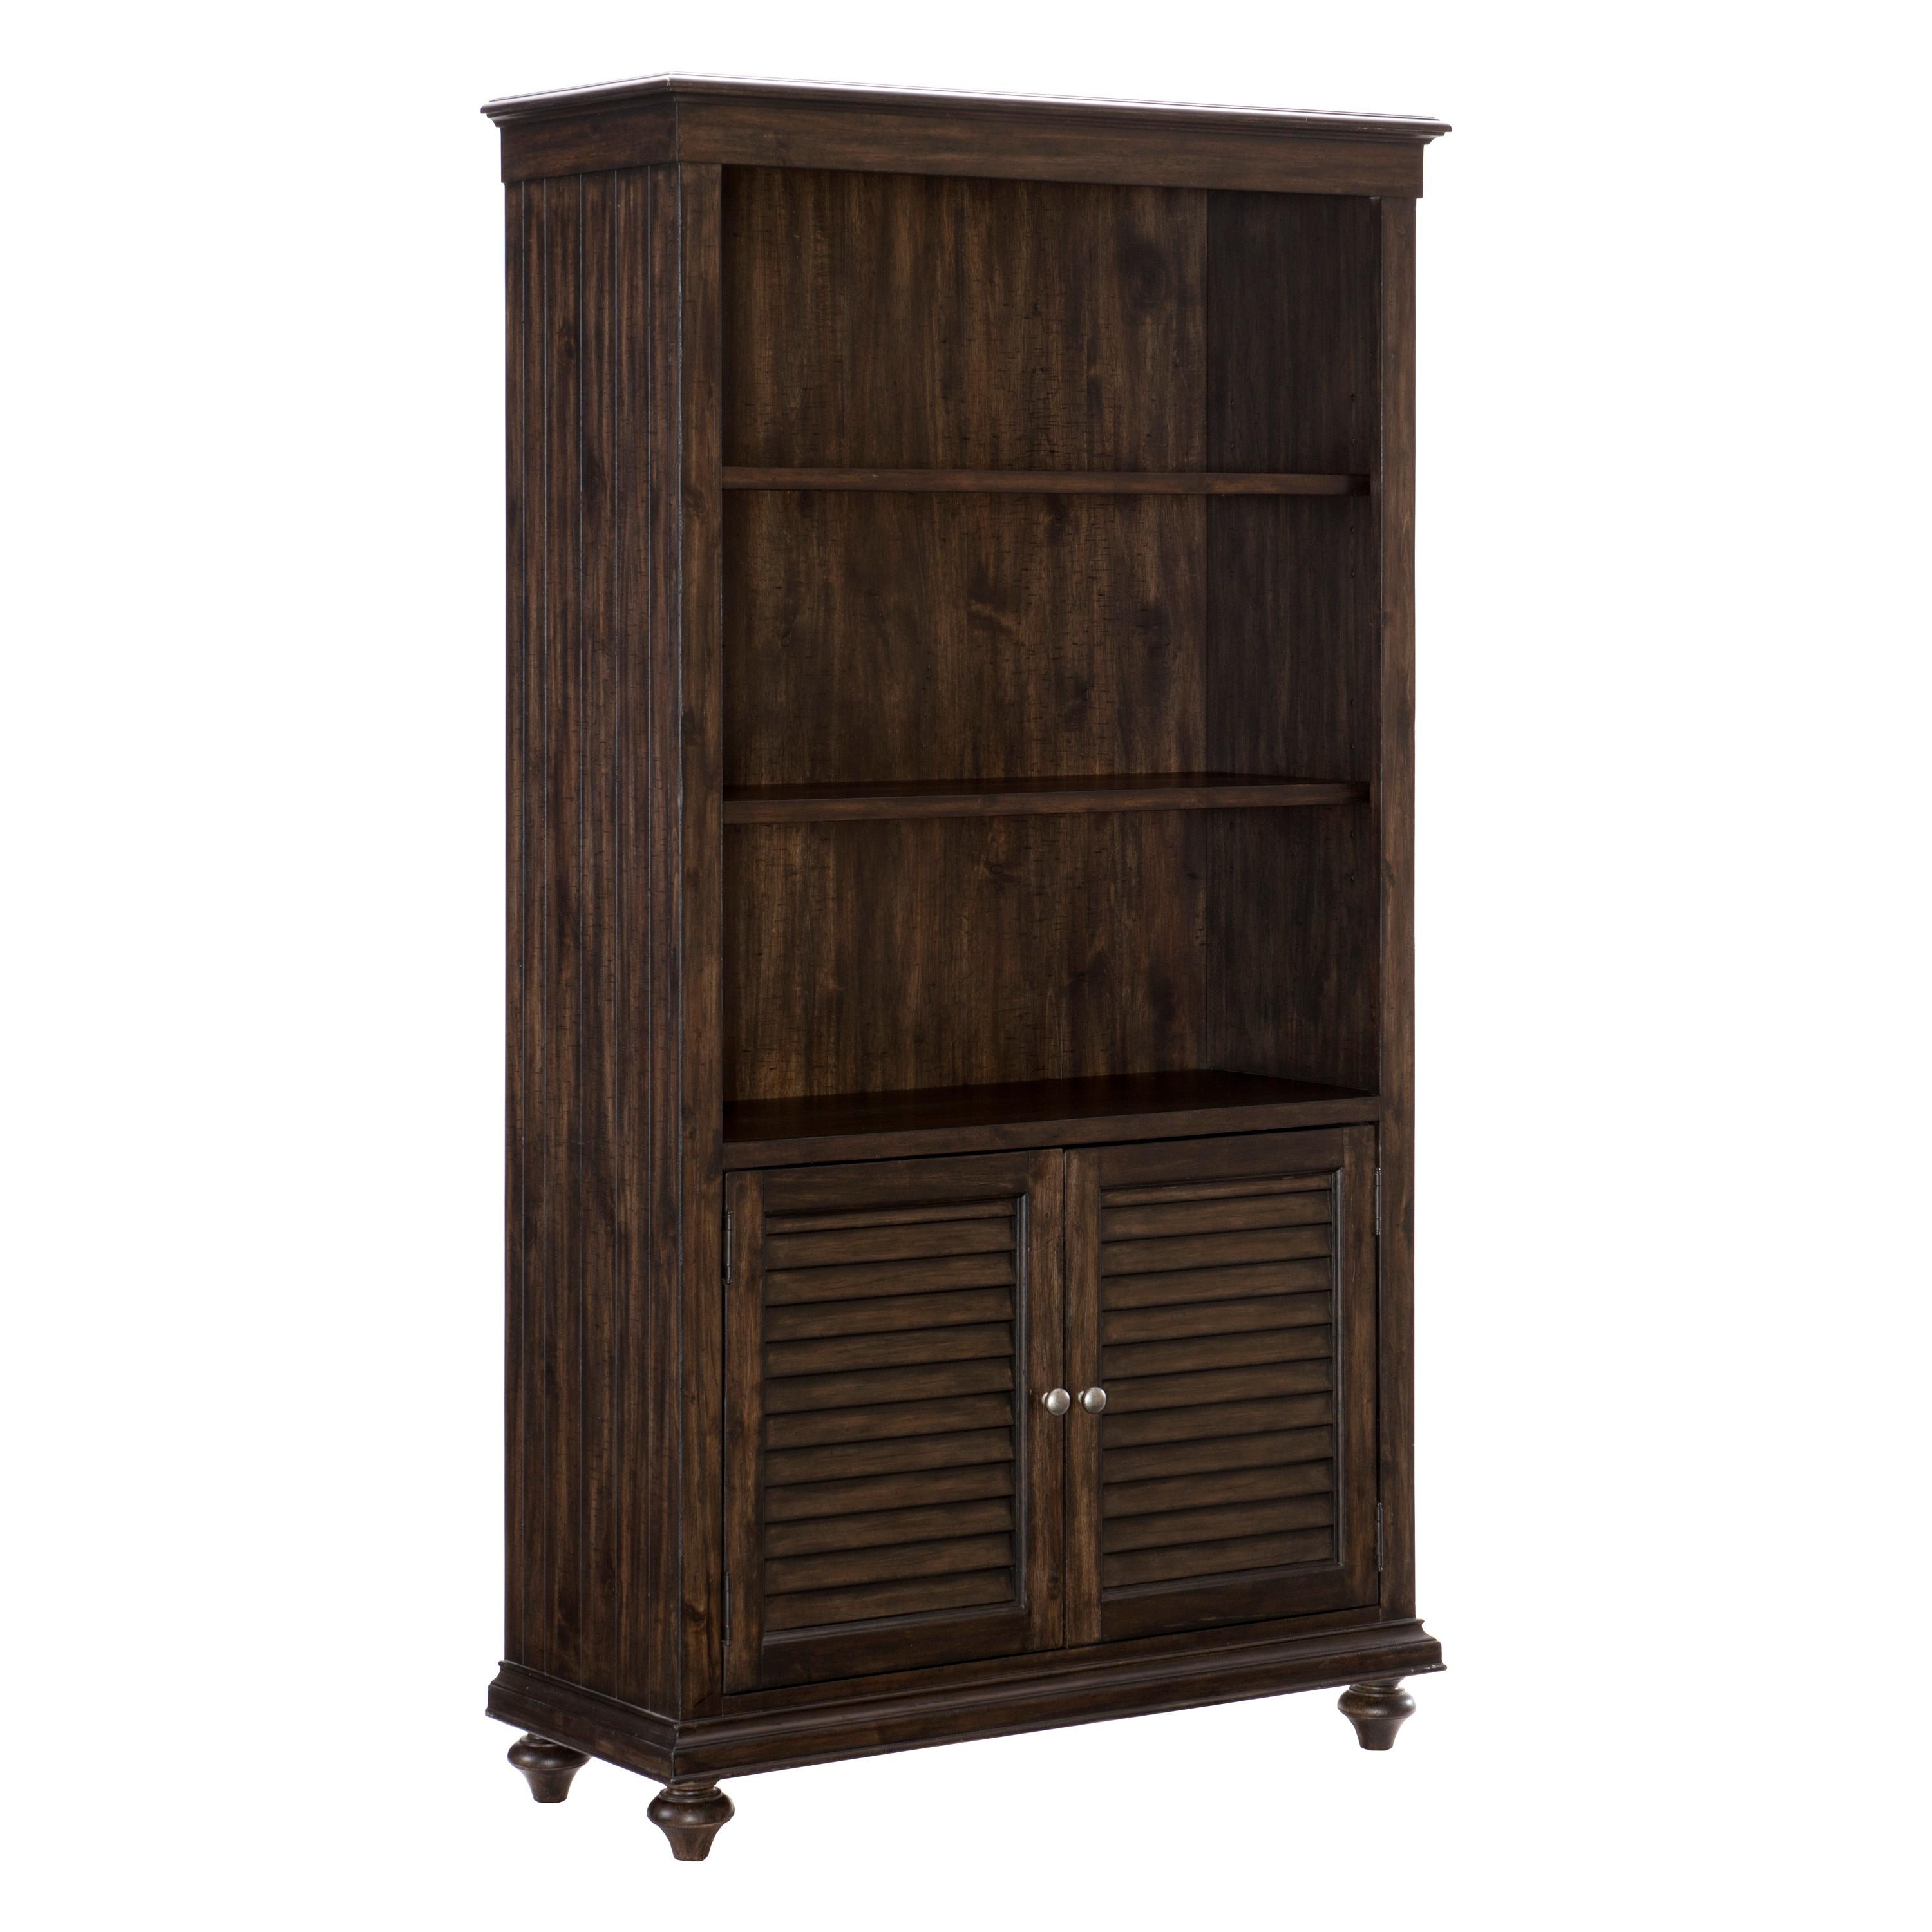 

    
Transitional Driftwood Charcoal Wood Bookcase Homelegance 1689-18 Cardano
